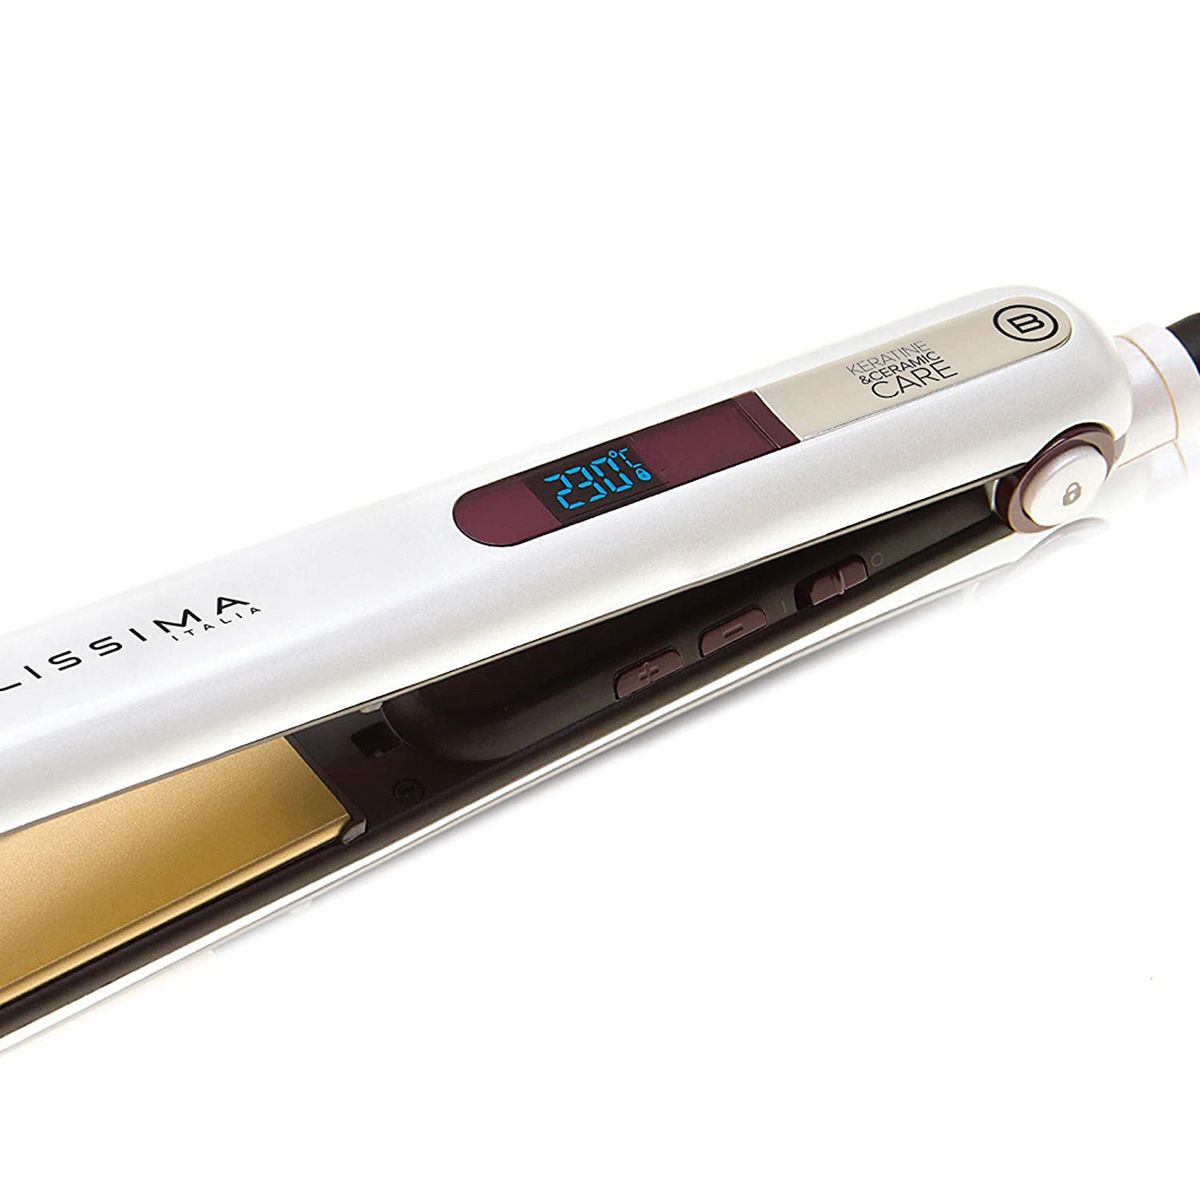 Imetec Bellissima B9 400, straightener, smooth or wavy styling, ceramic and keratin coating, hair straightener, rounded plates.